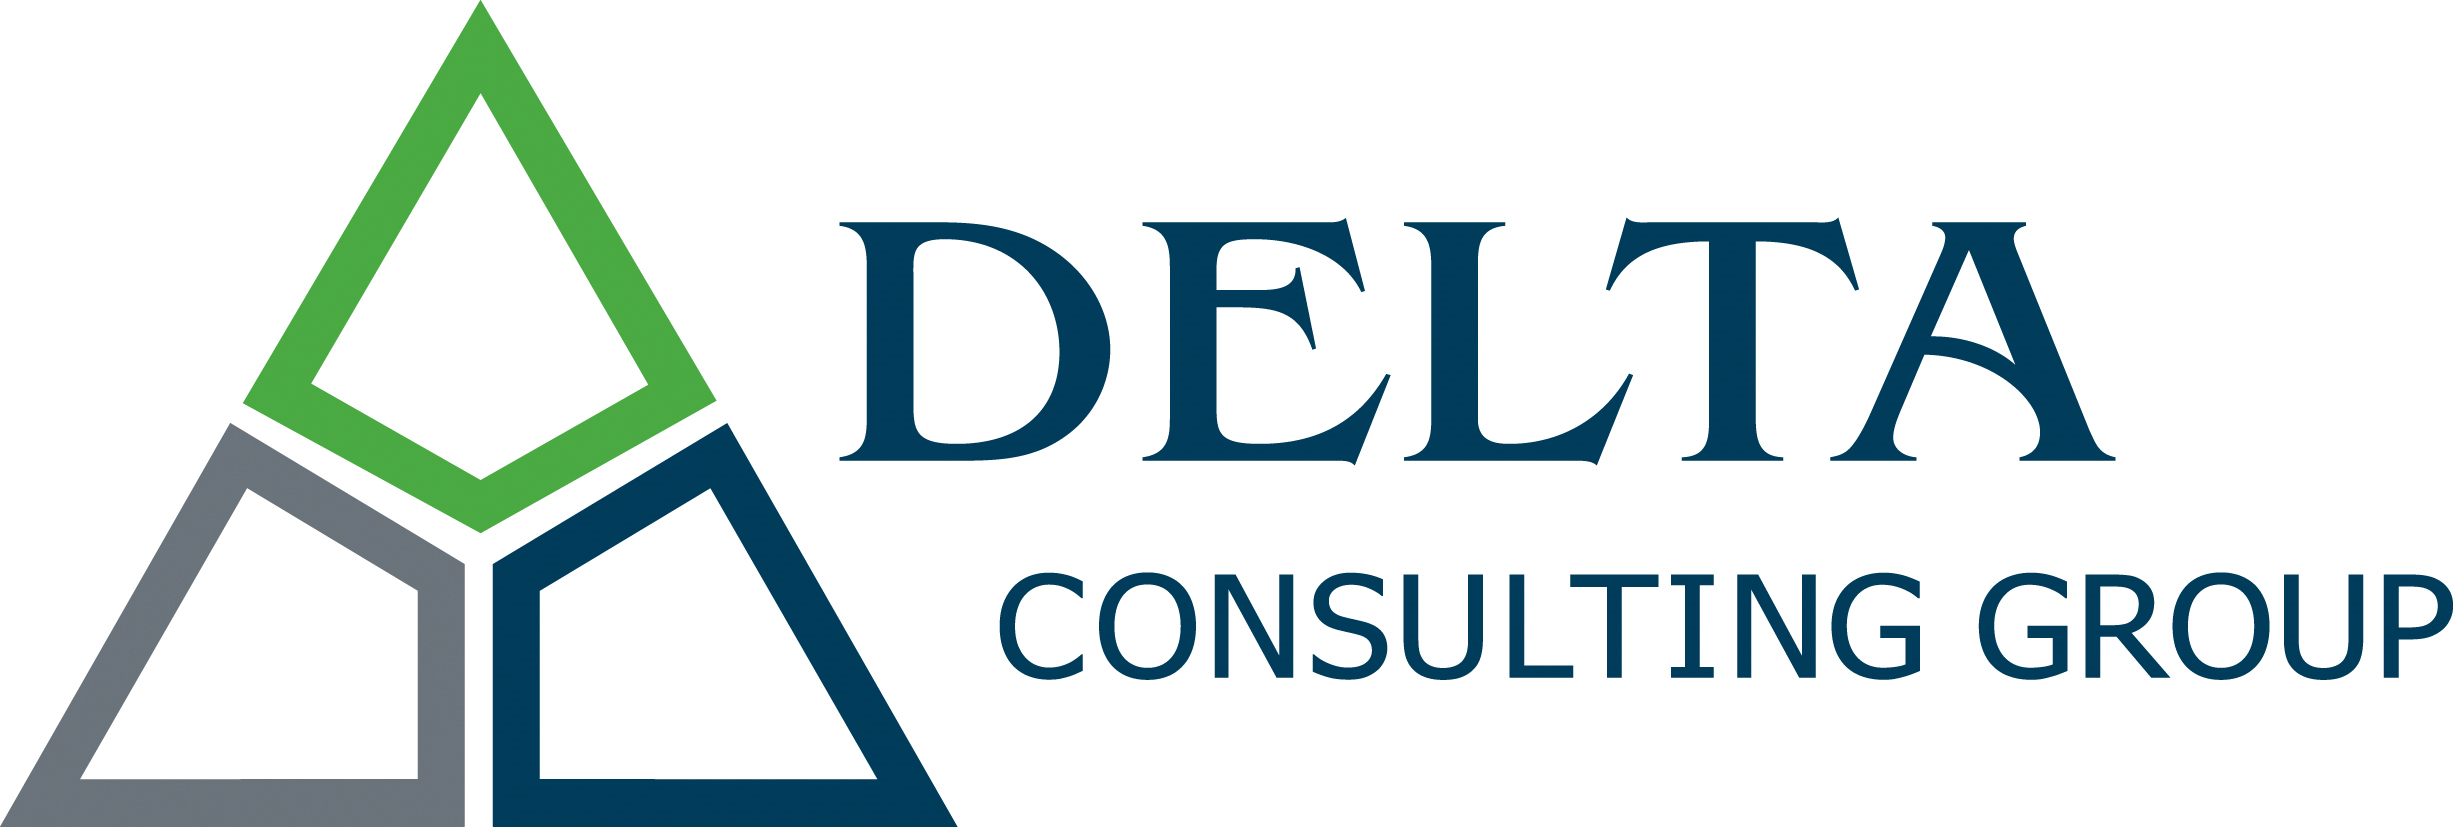 Delta Consulting Group logo